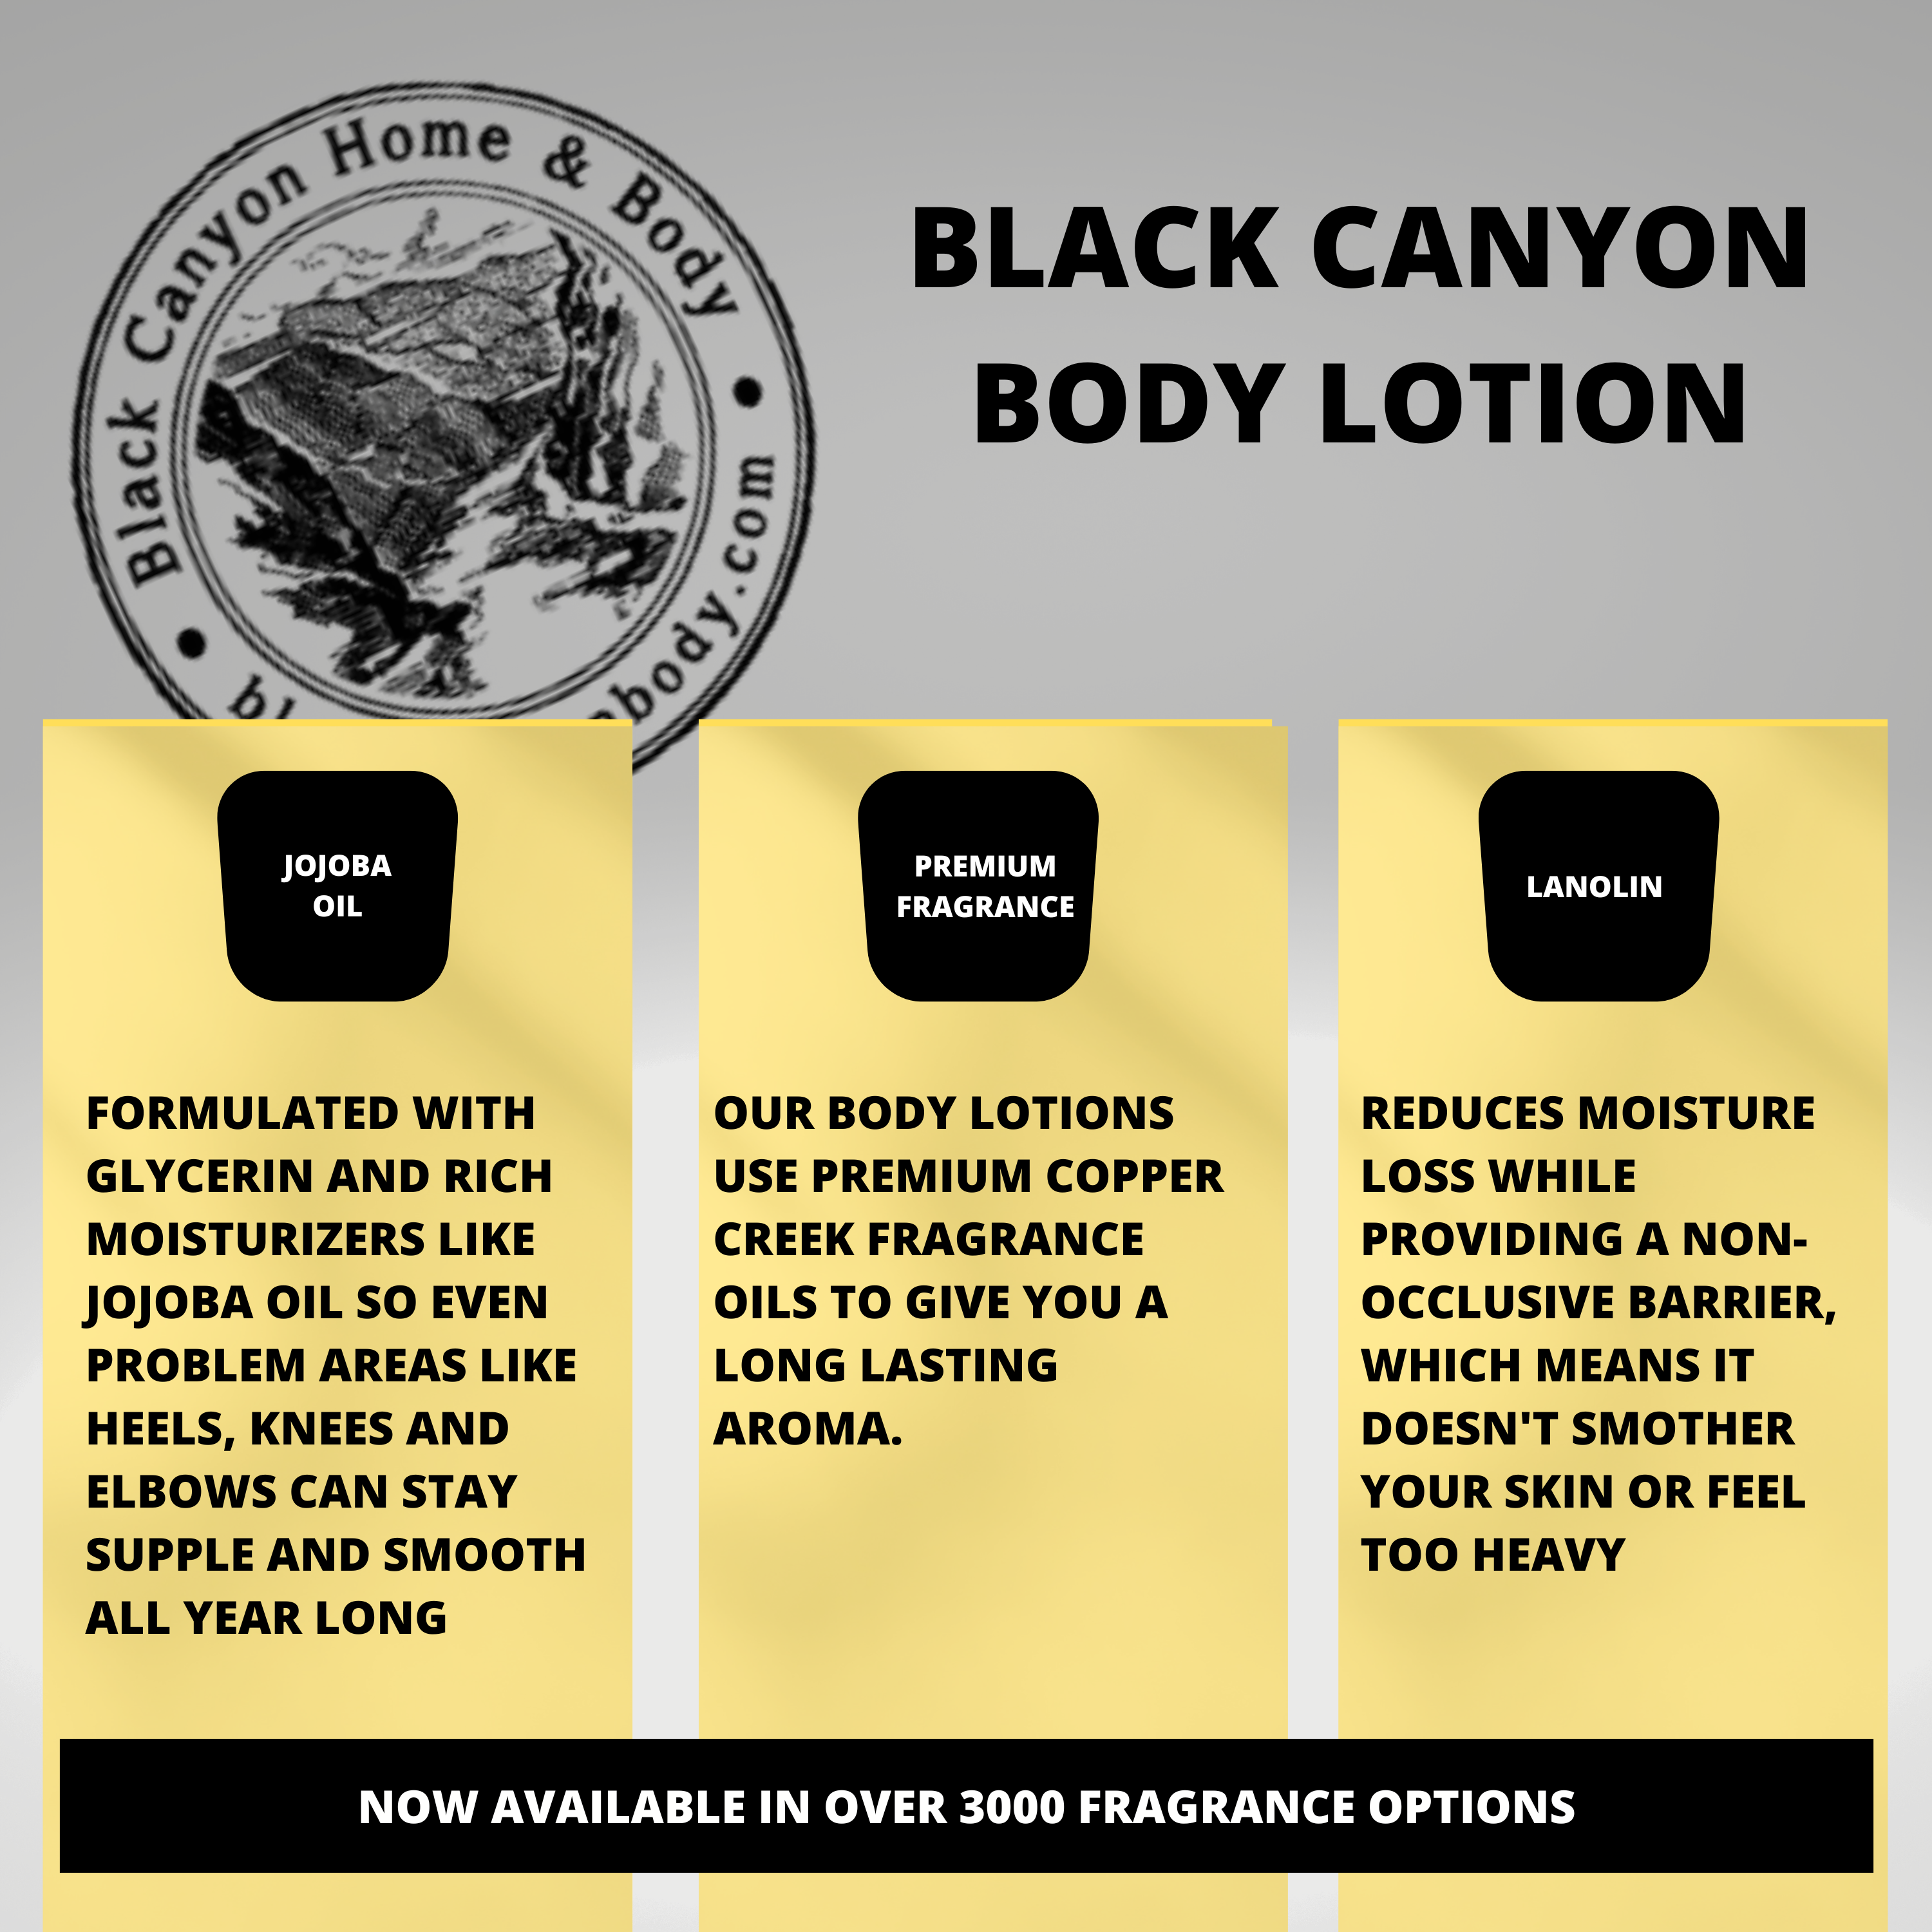 Black Canyon Agave Peach Scented Luxury Body Lotion with Lanolin and Jojoba Oil